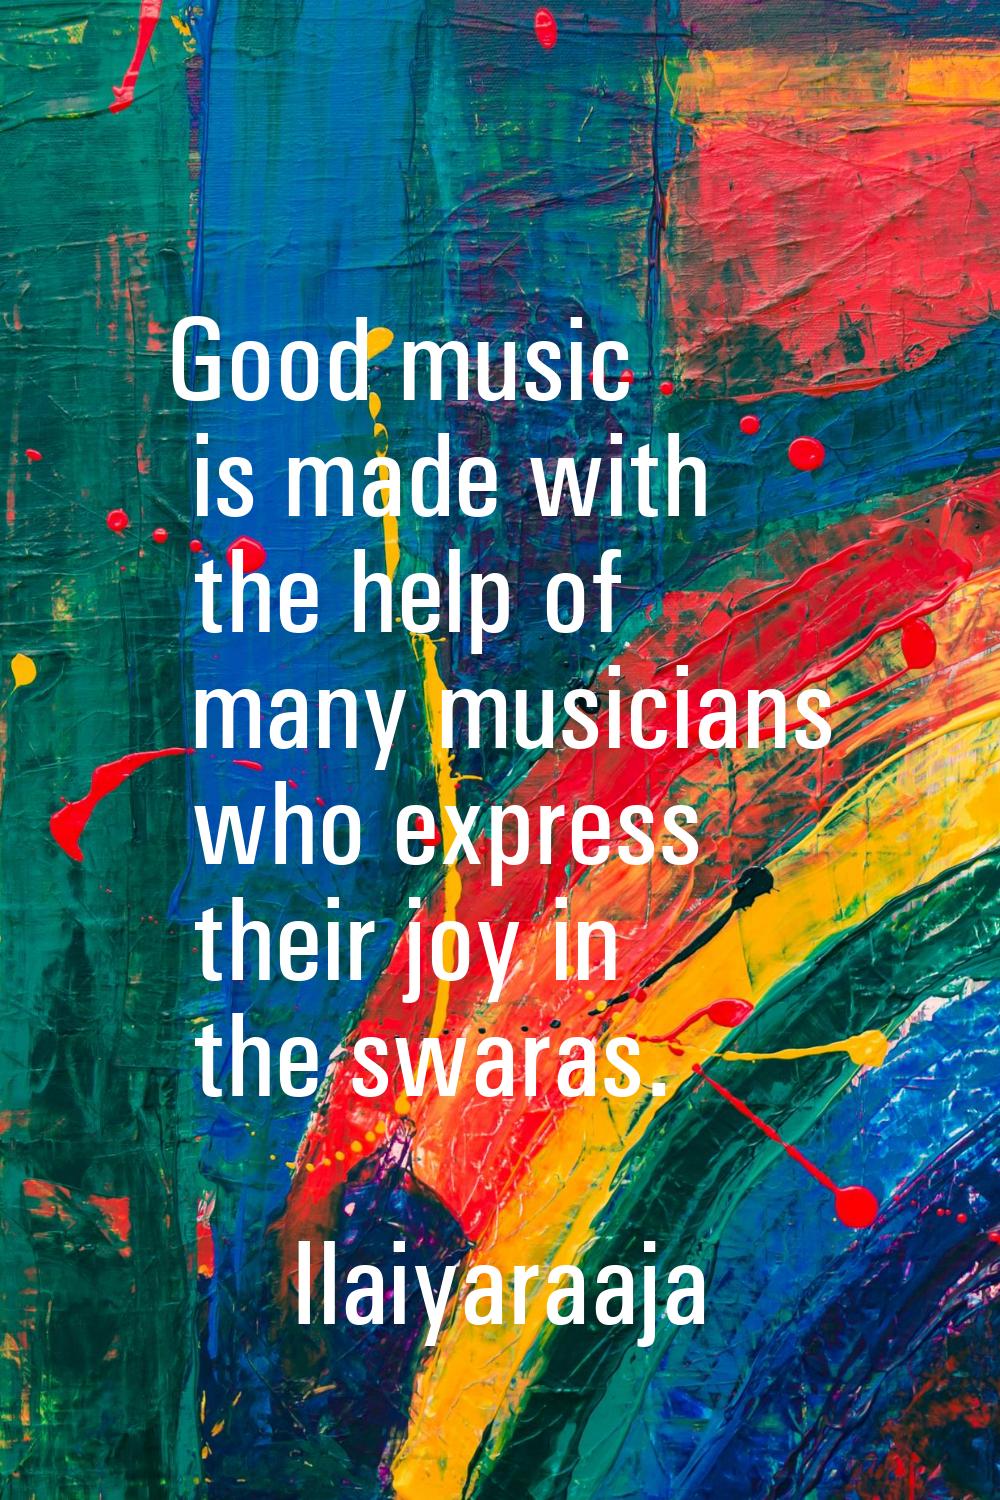 Good music is made with the help of many musicians who express their joy in the swaras.